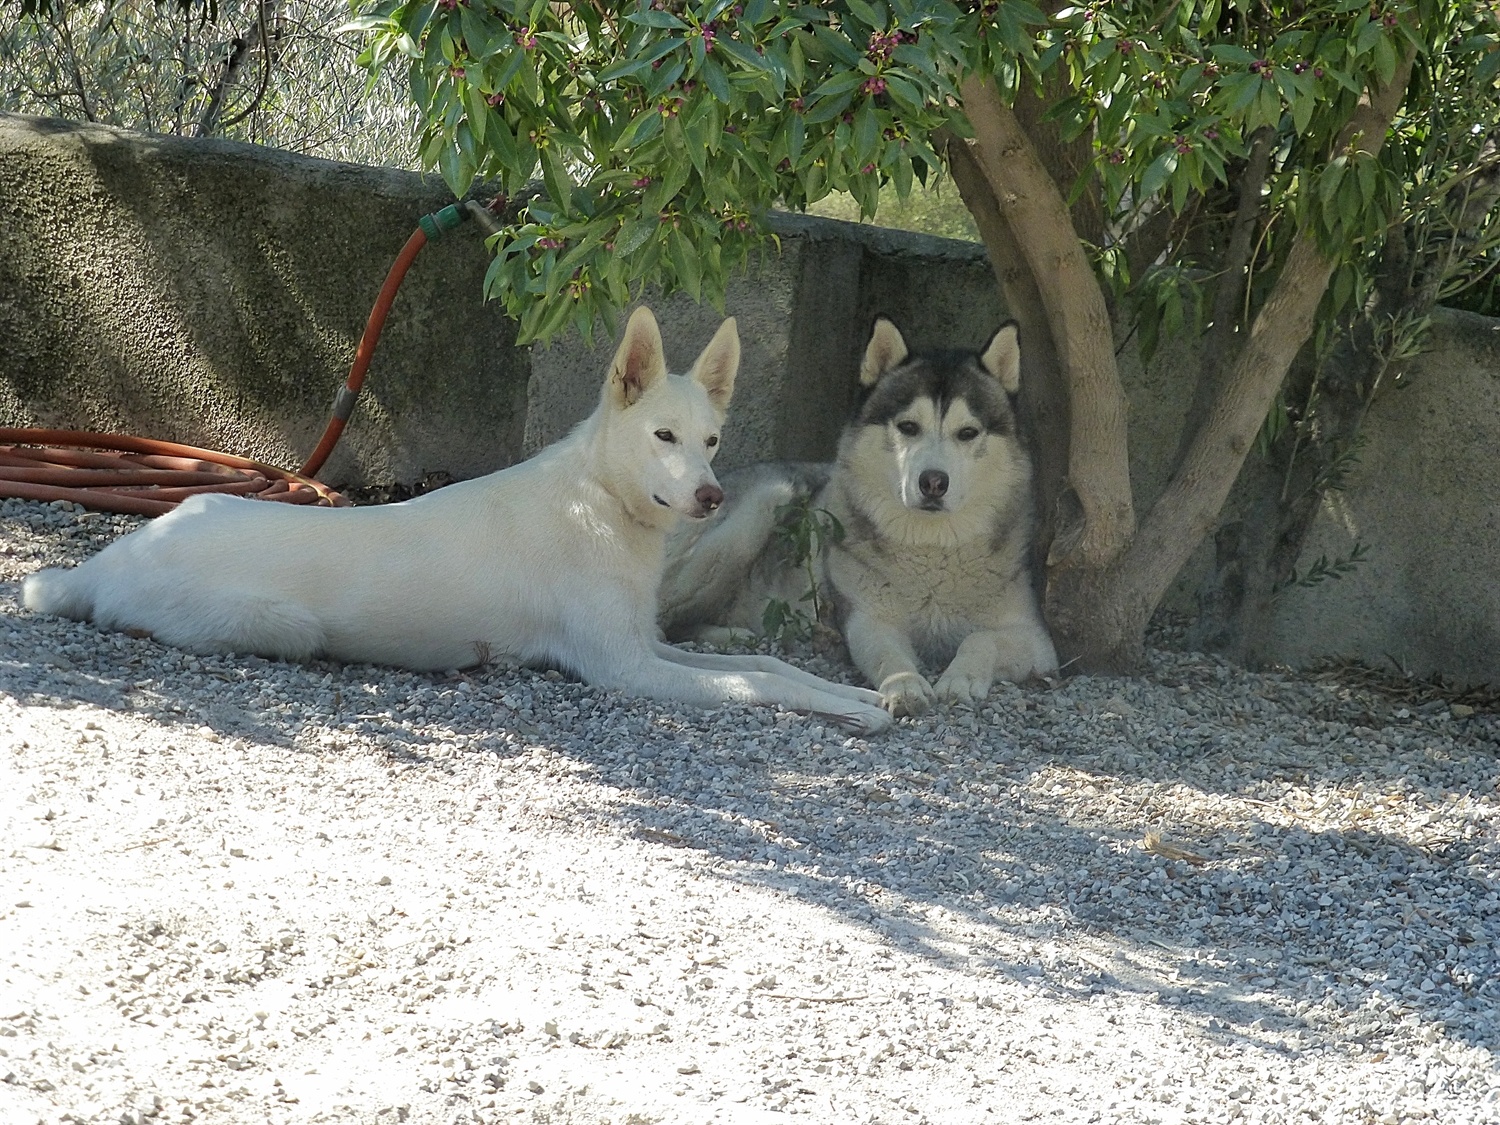 Hanging out in the shade